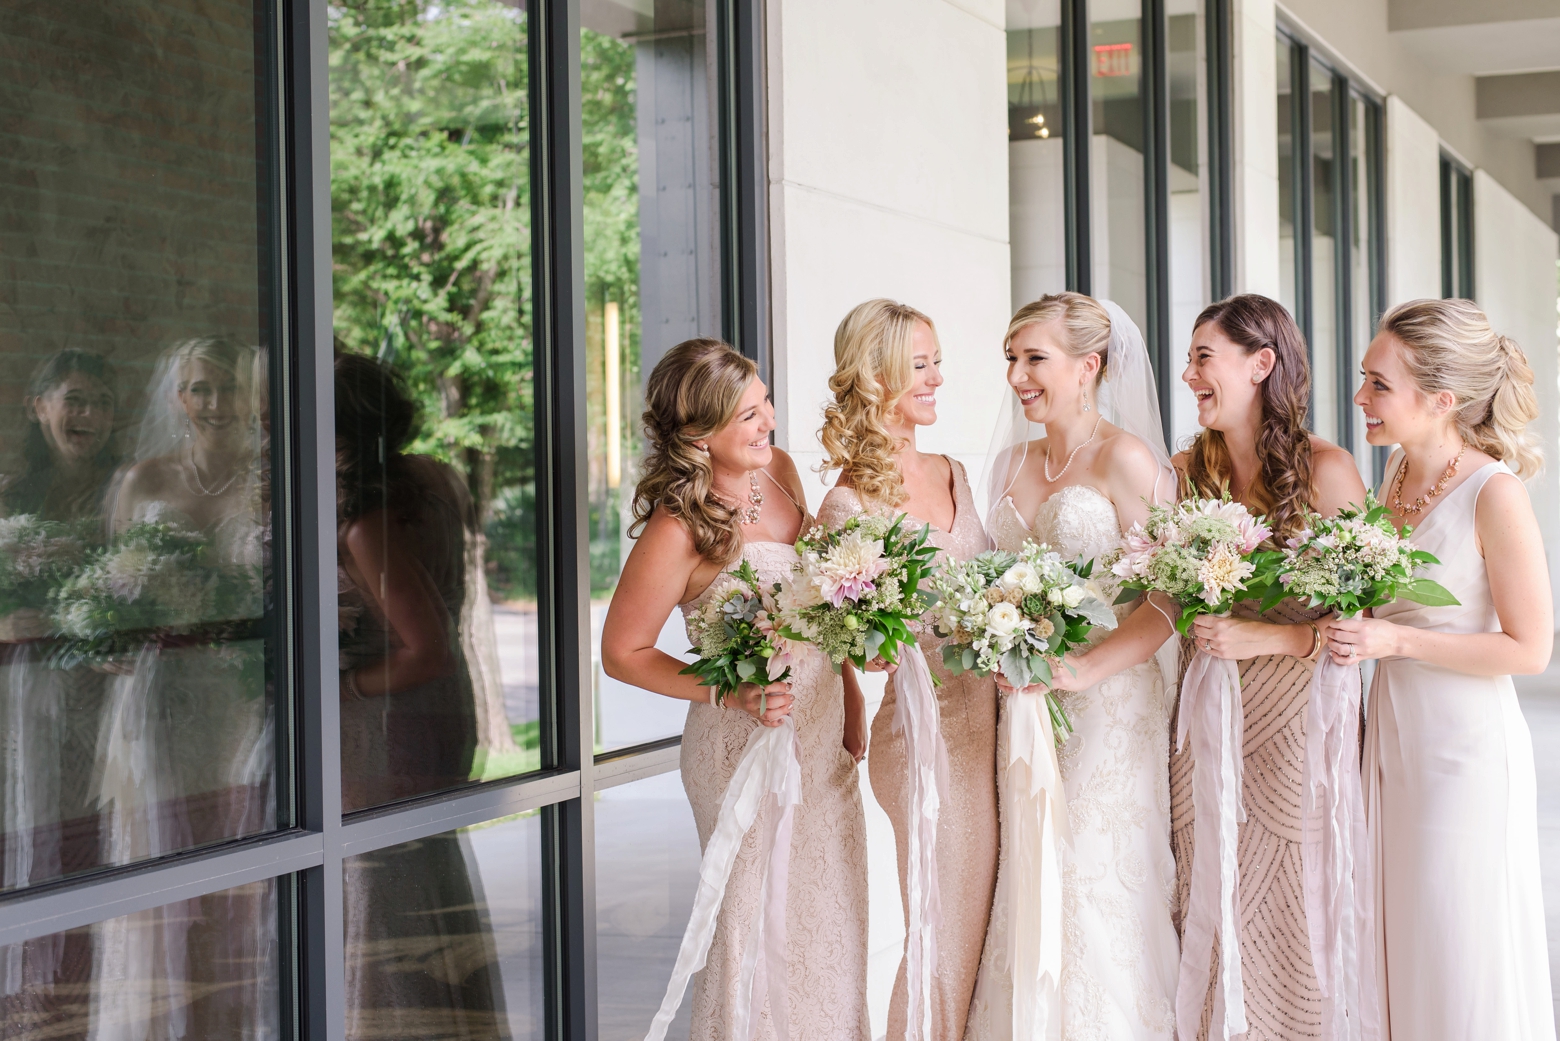 The Bride and her Bridesmaids holding their floral bouquet and laughing